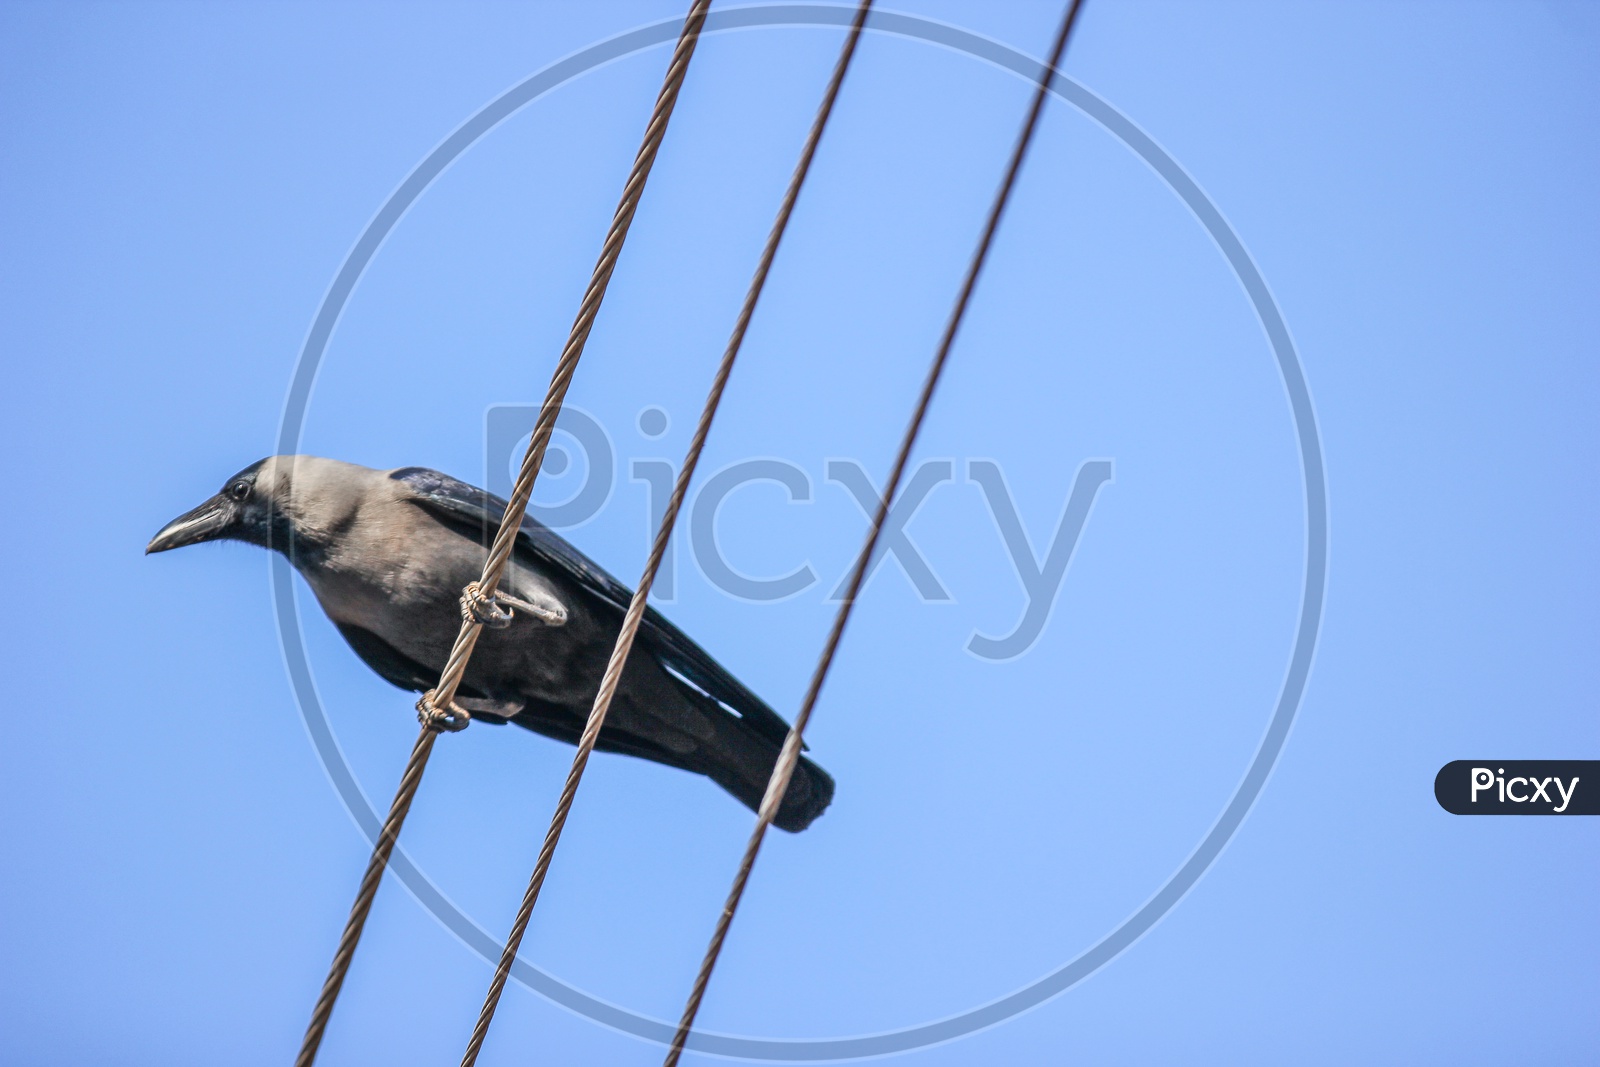 Crow On Electric Lines Or Wires